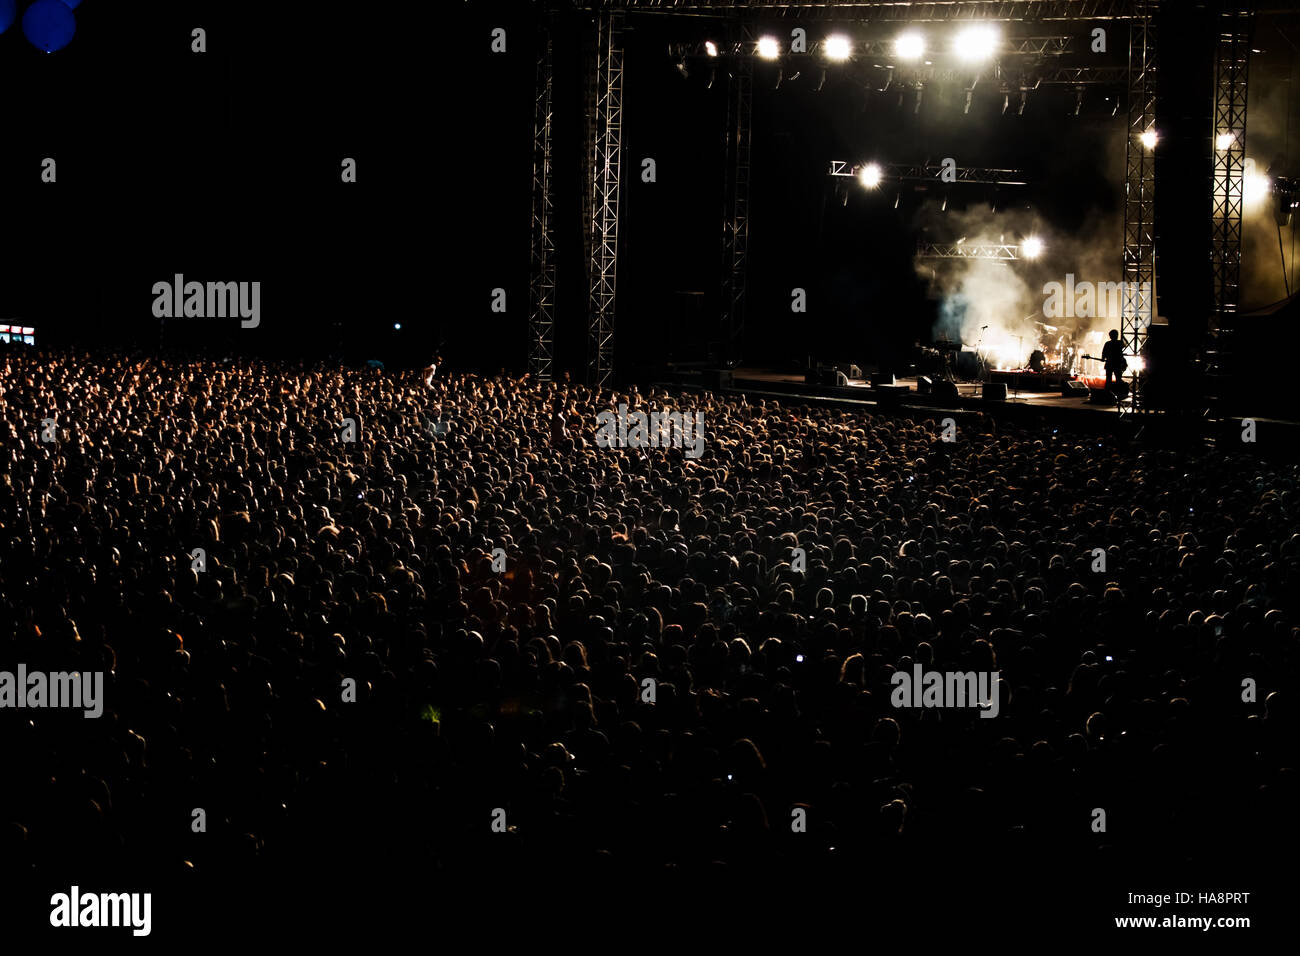 Thousands of People Crowd at night Rock Concert Stock Photo